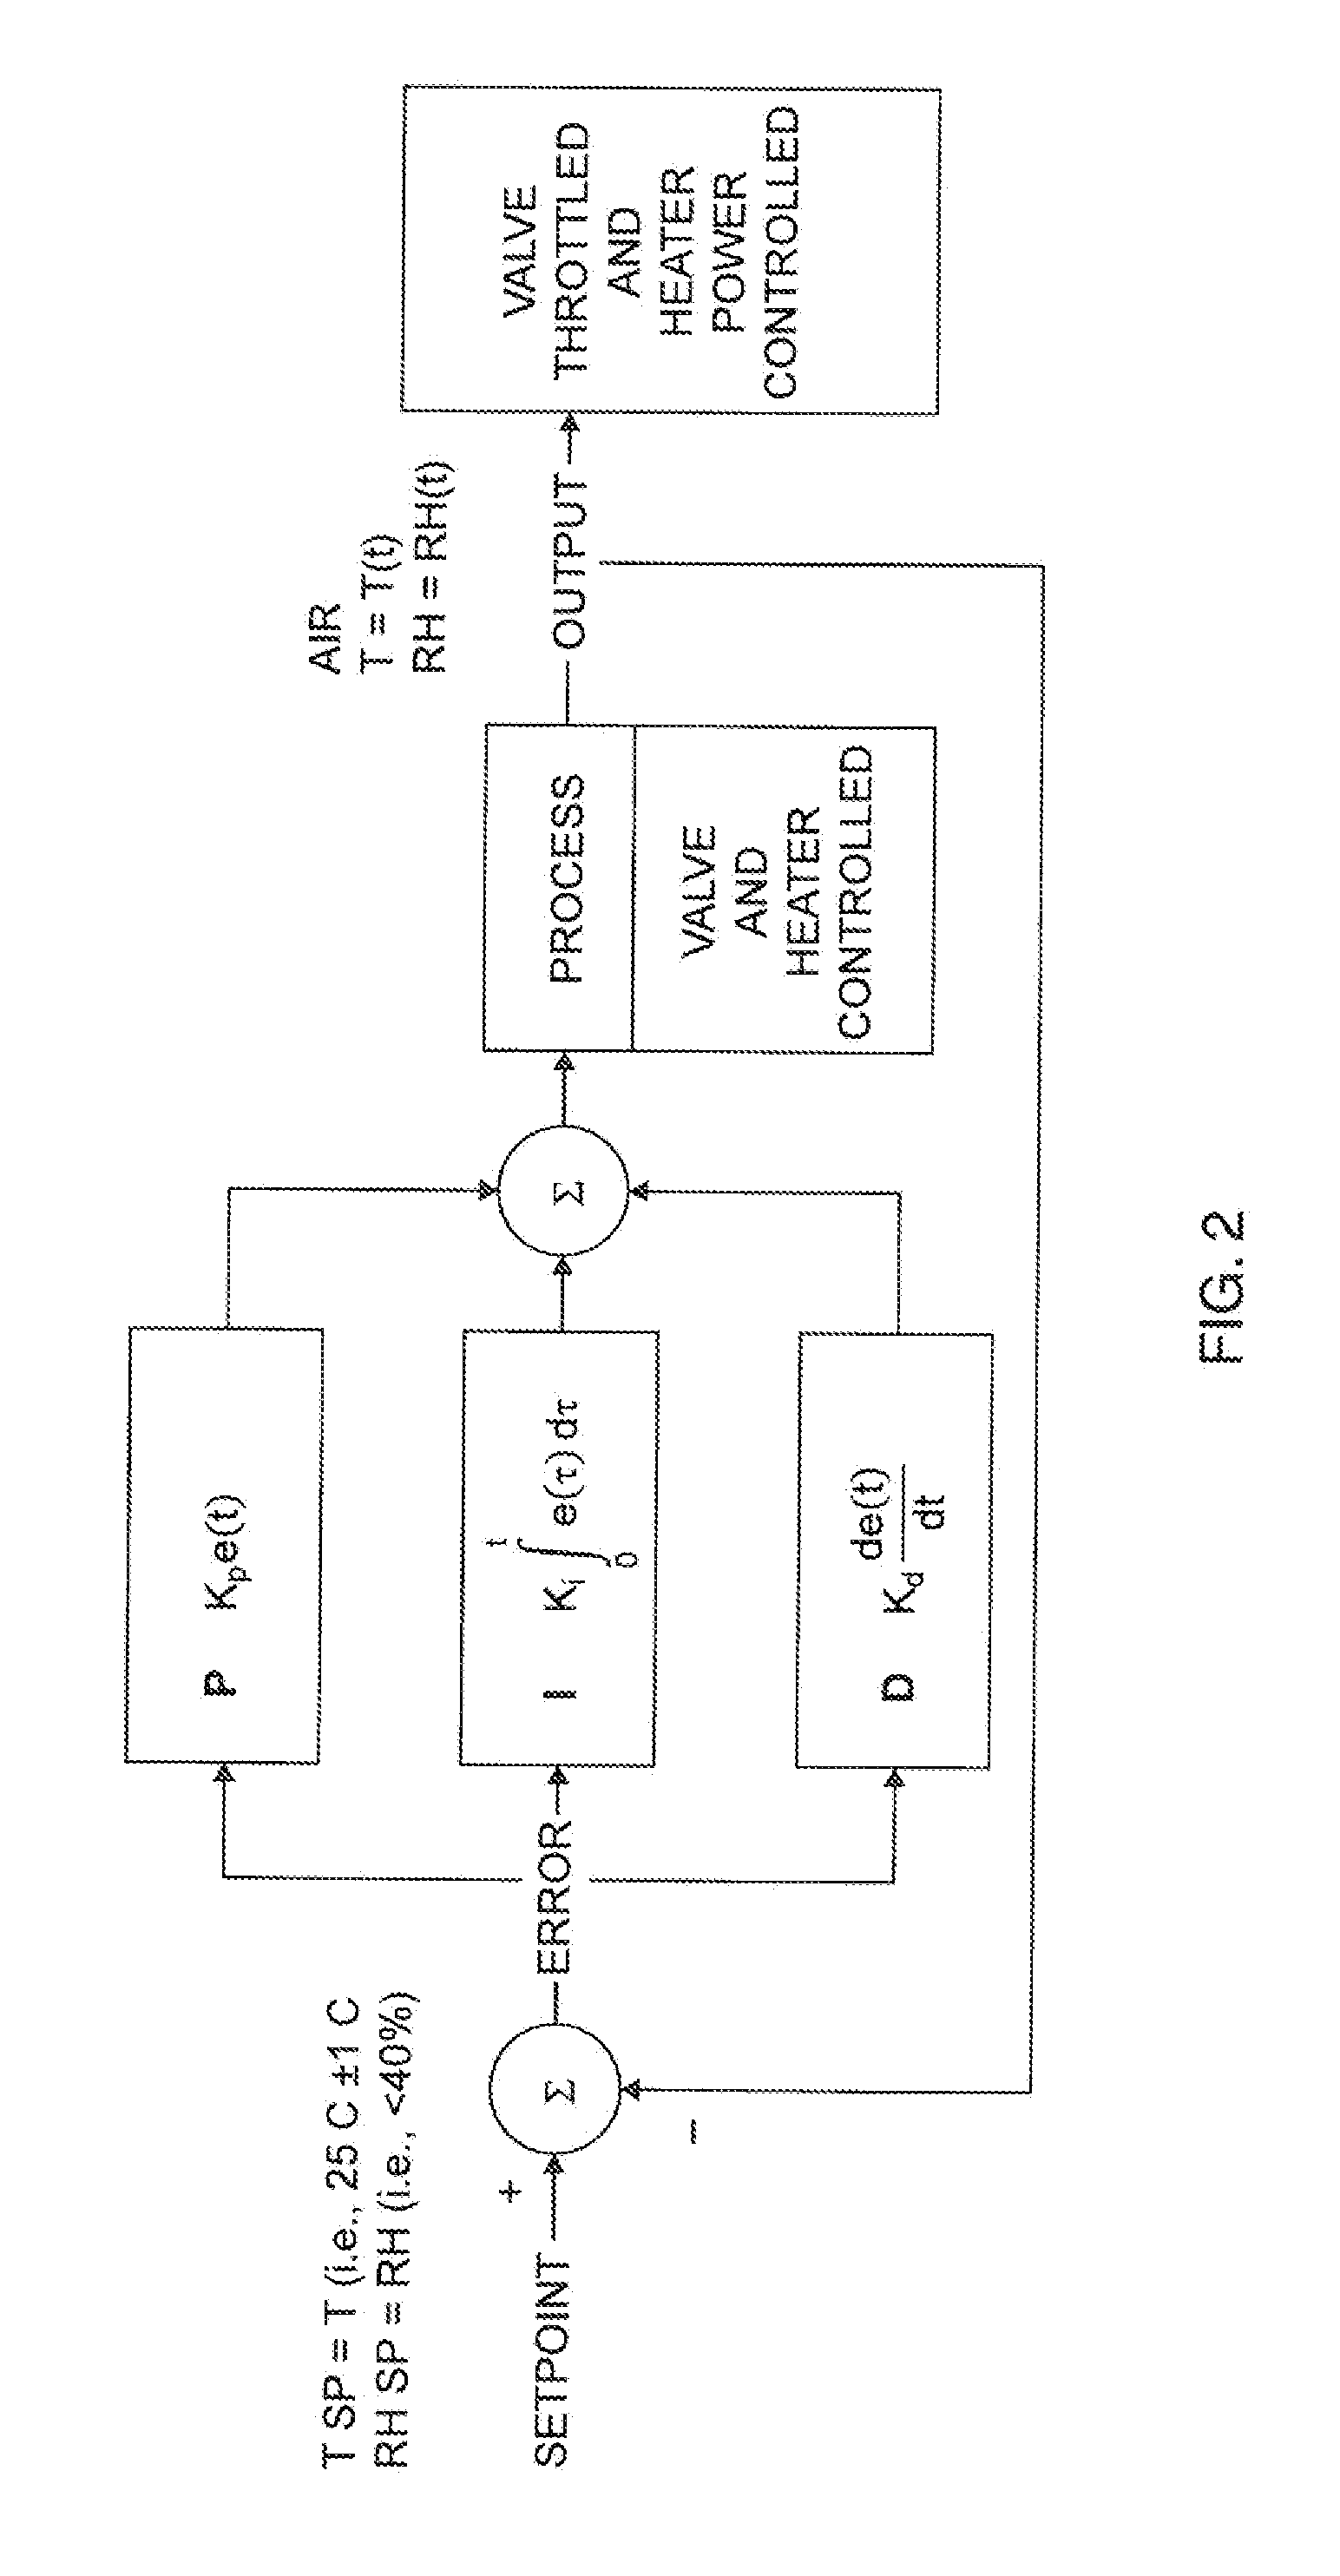 Environmental control system for precision airborne payloads